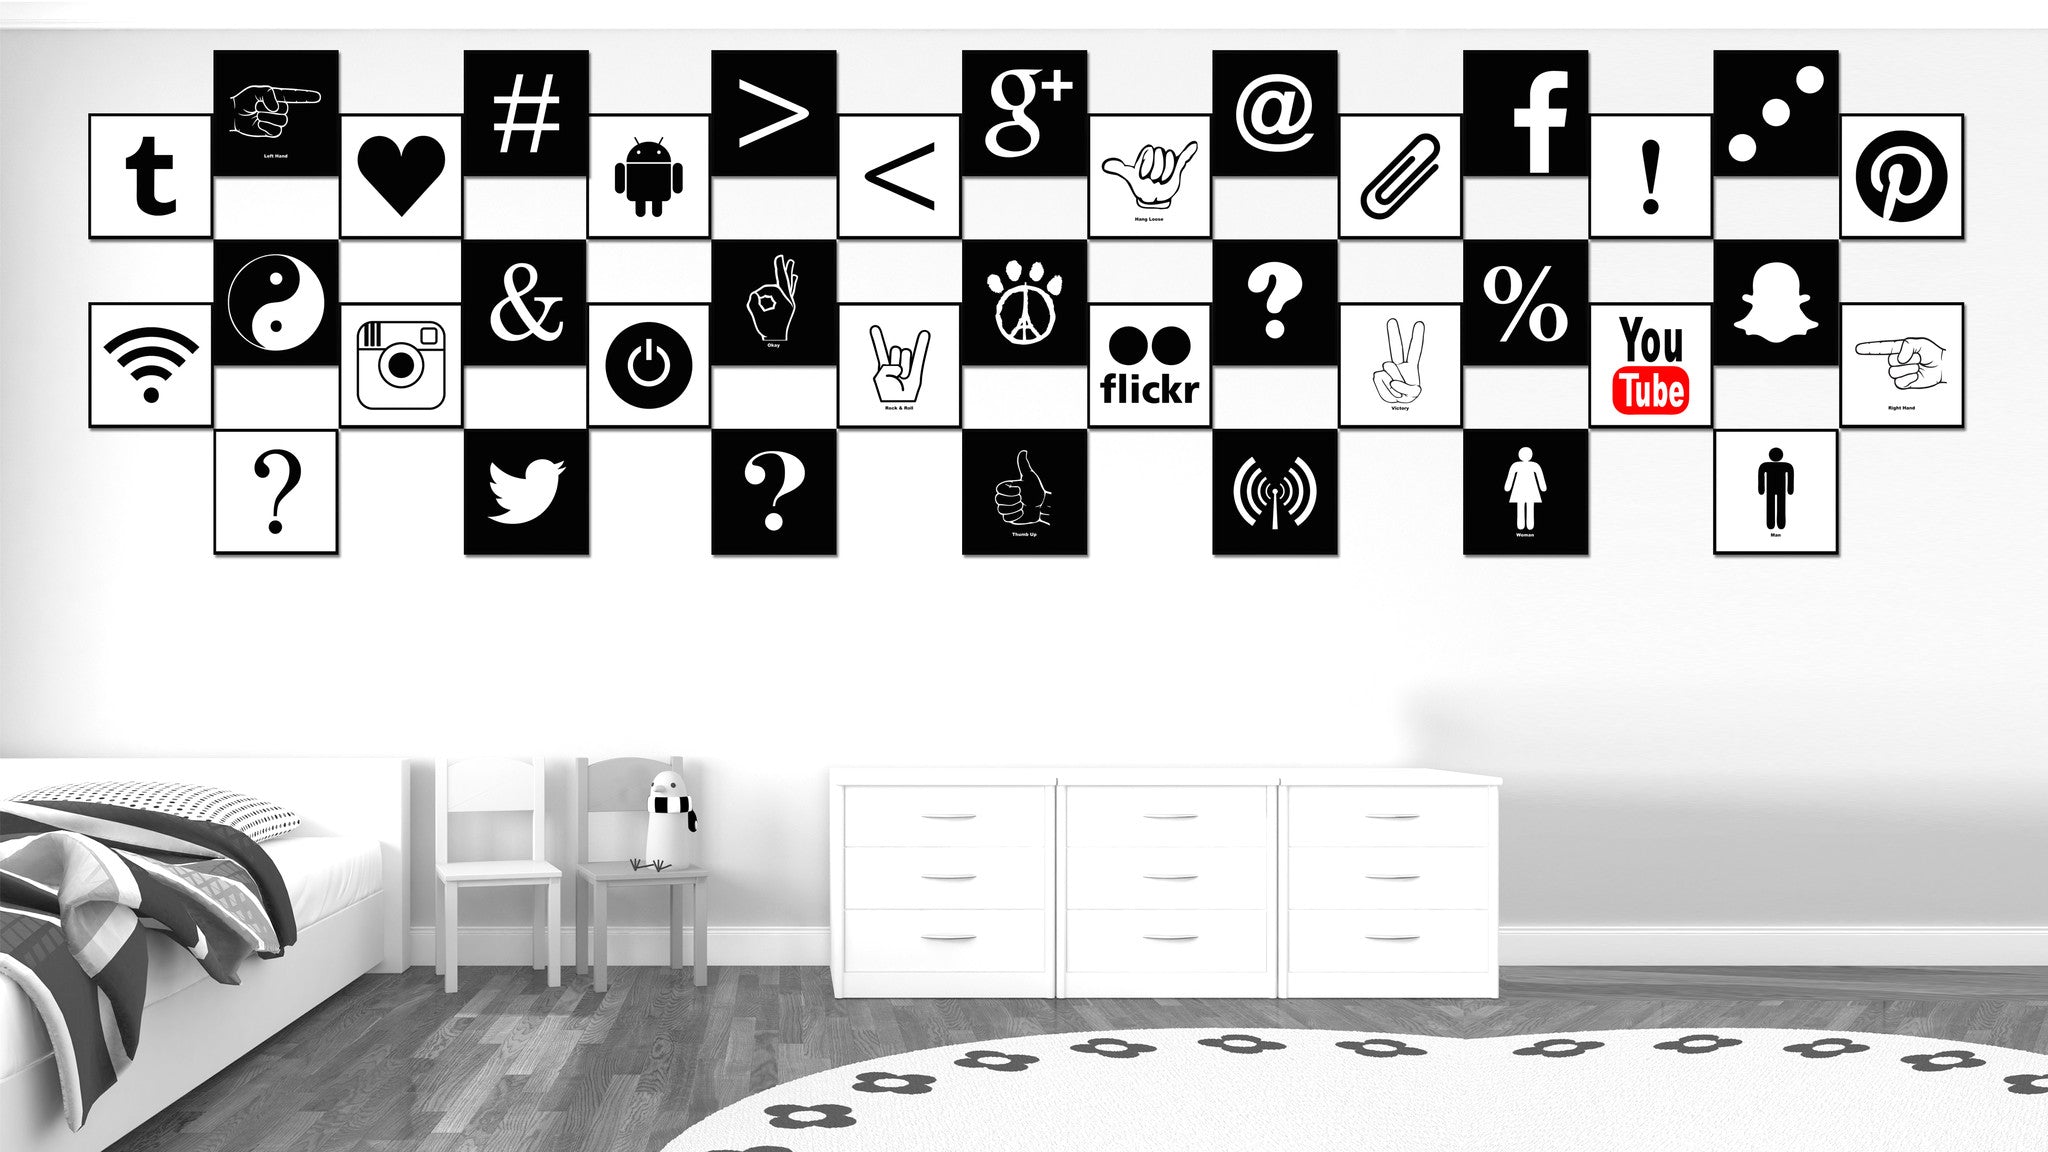 Exclamation Social Media Icon Canvas Print Picture Frame Wall Art Home Decor